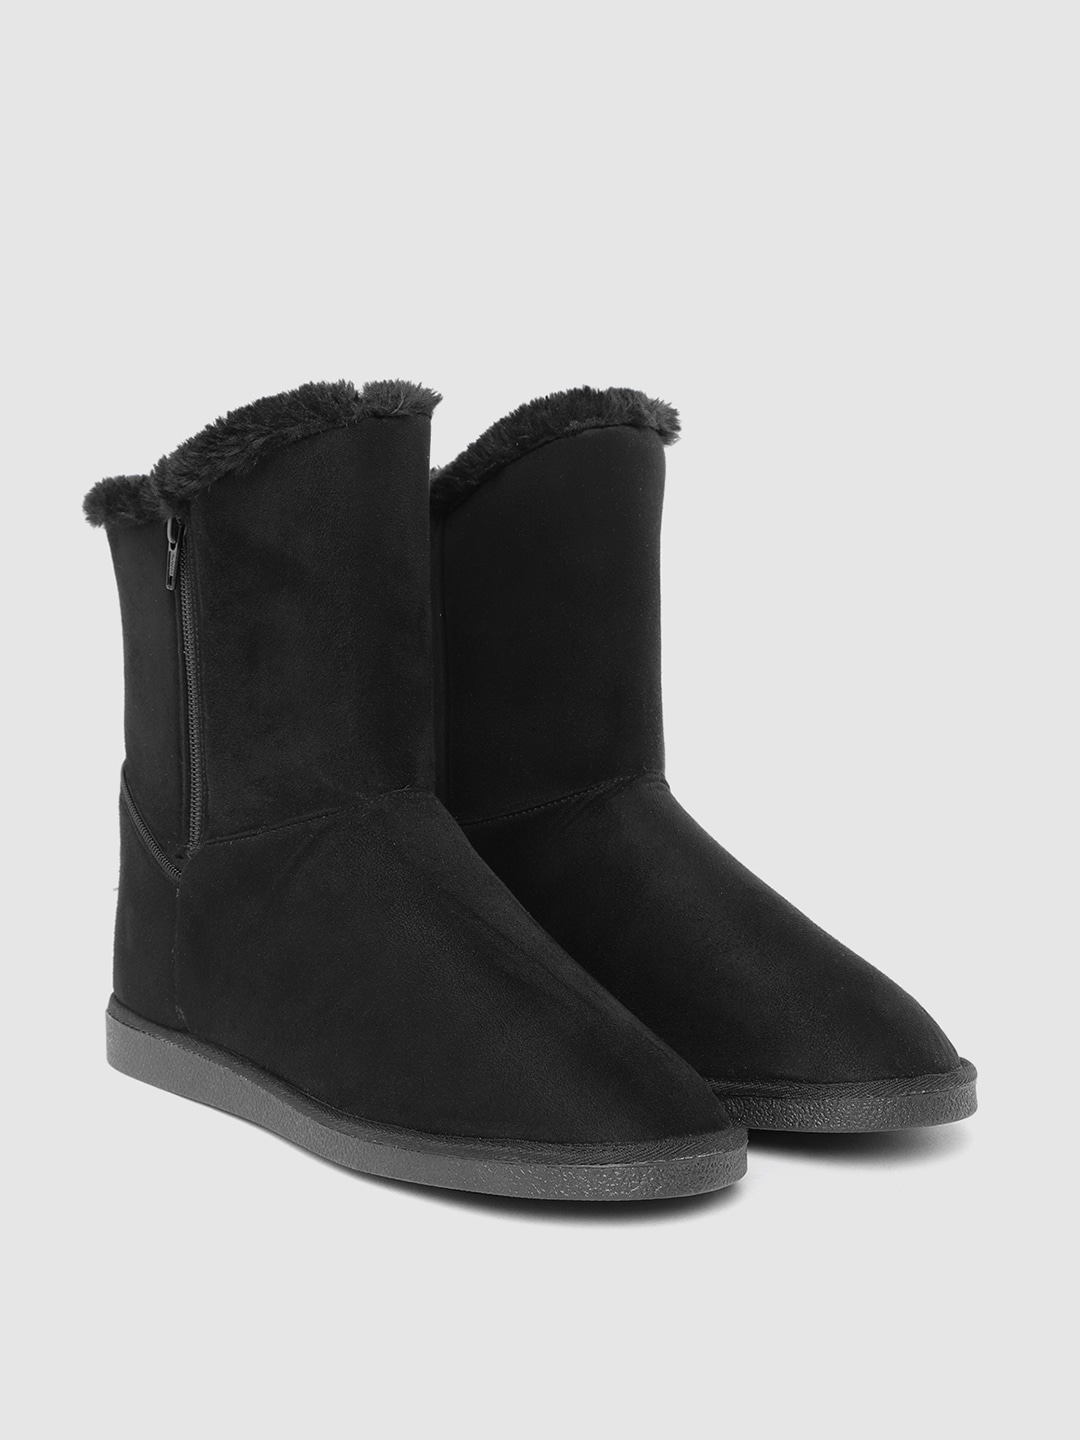 Carlton London Women Black Solid Synthetic Suede Finish Faux Fur Lined Mid-Top Flat Boots Price in India